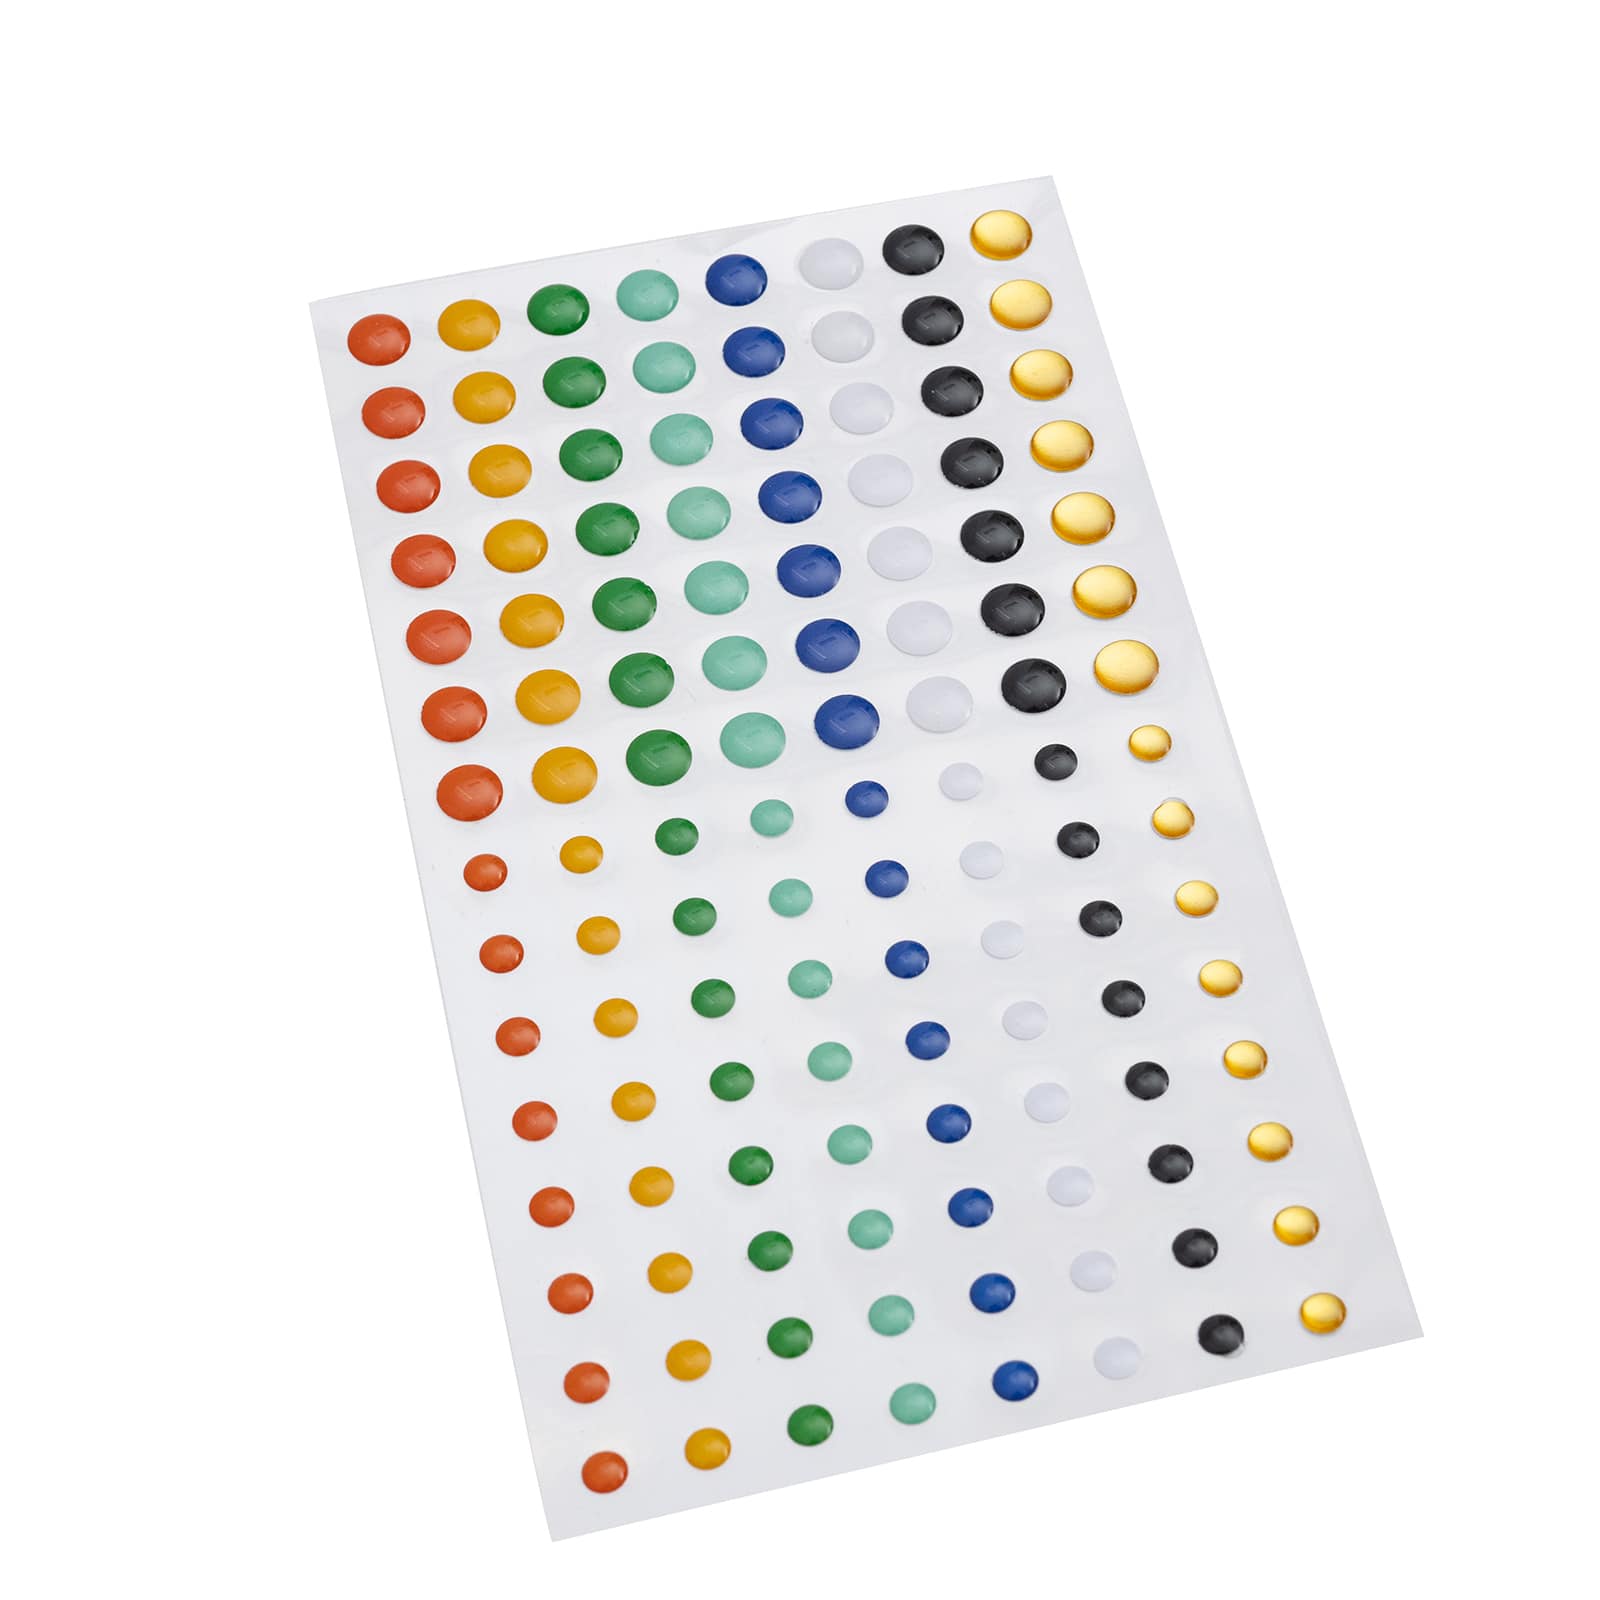 12 Packs: 120 ct. (1,440 total) Multicolor Enamel Dot Stickers by Recollections&#x2122;